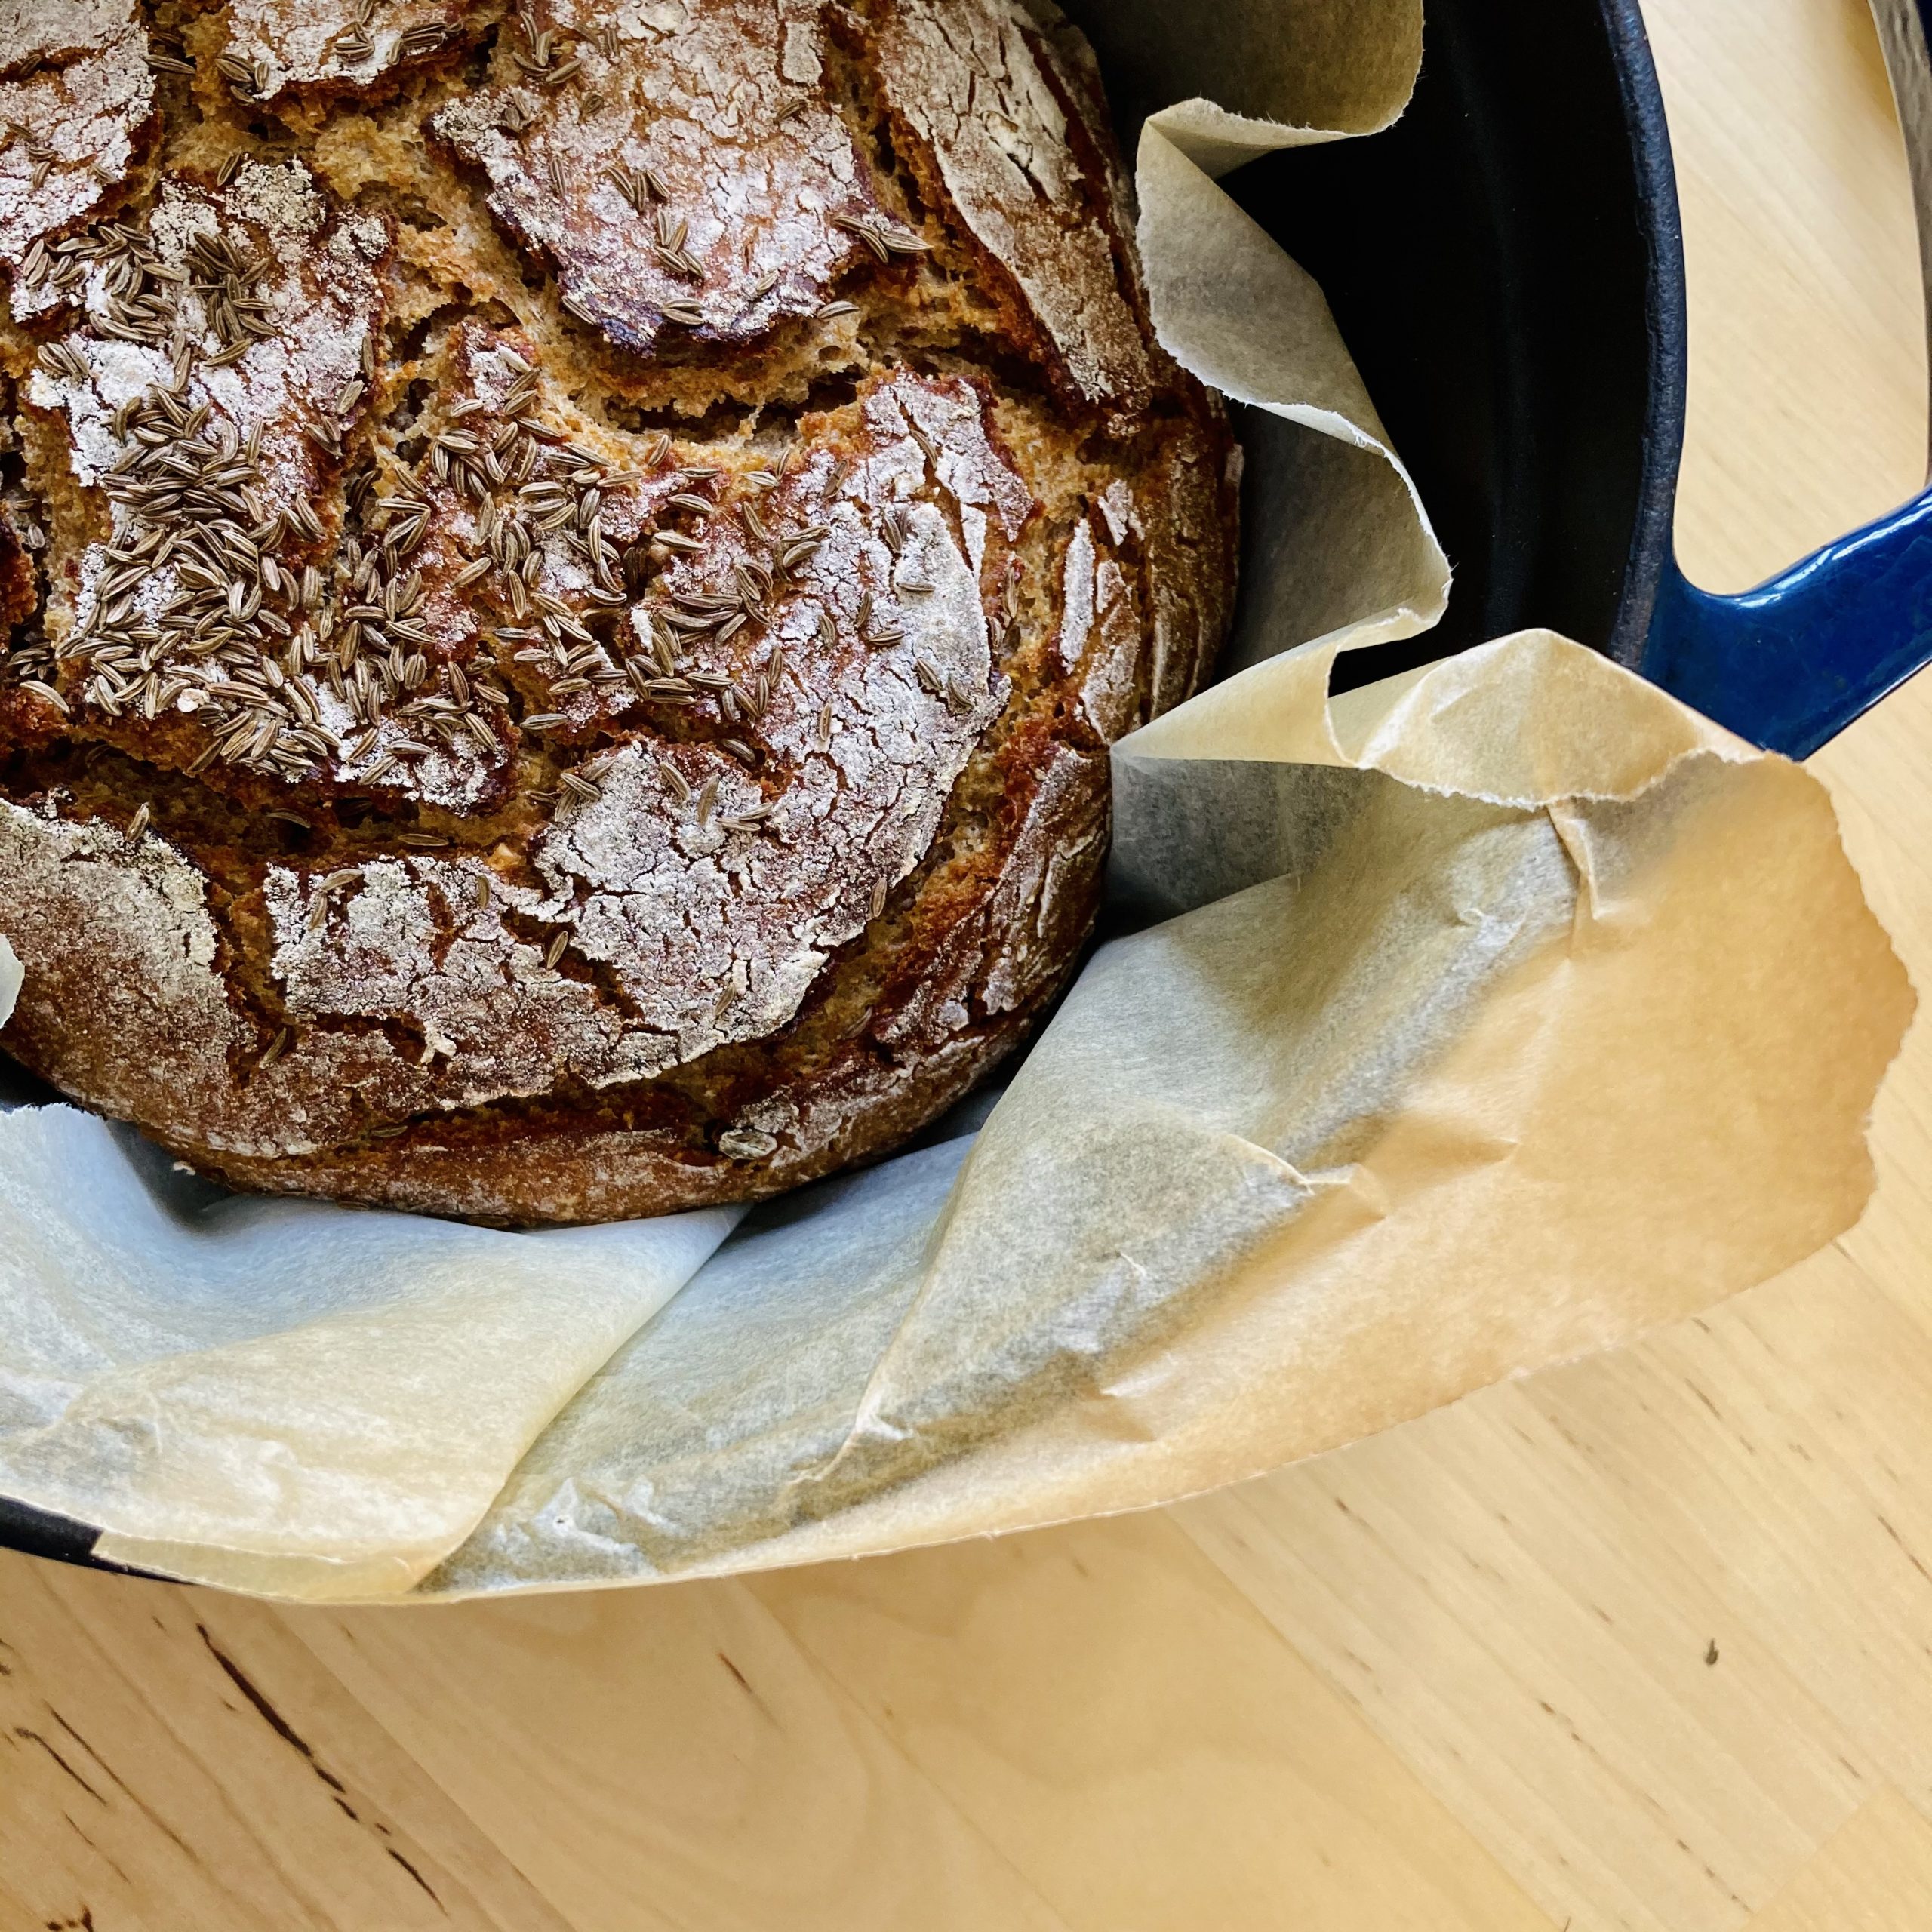 ‘Punch the dough down and let it rise’: a bread update by Margaux